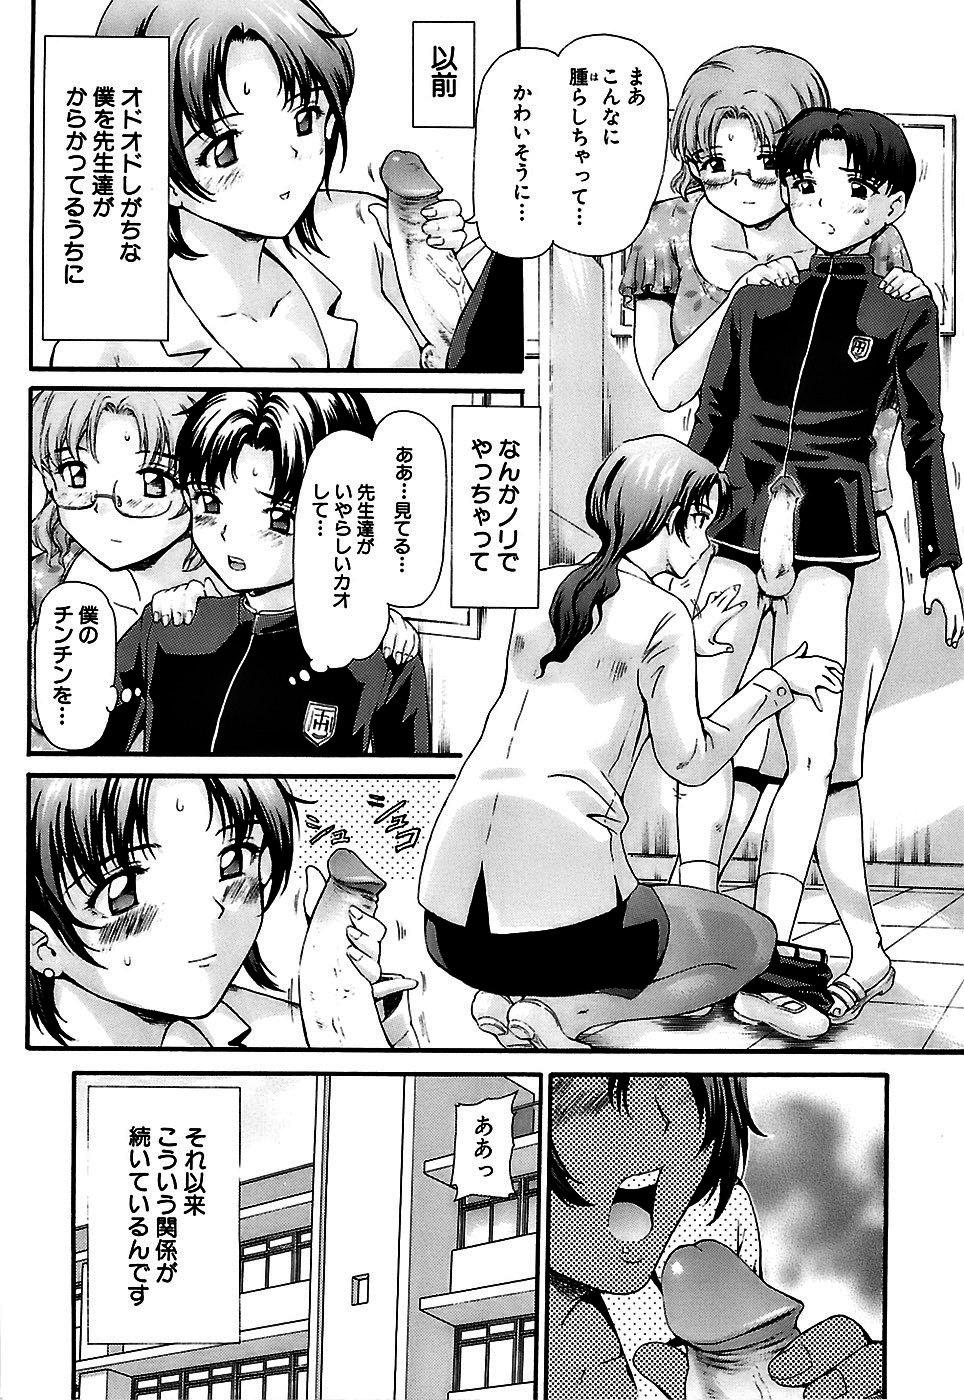 Shishunki no Himegoto - Thing of the Secret which is Made Adolescence 5